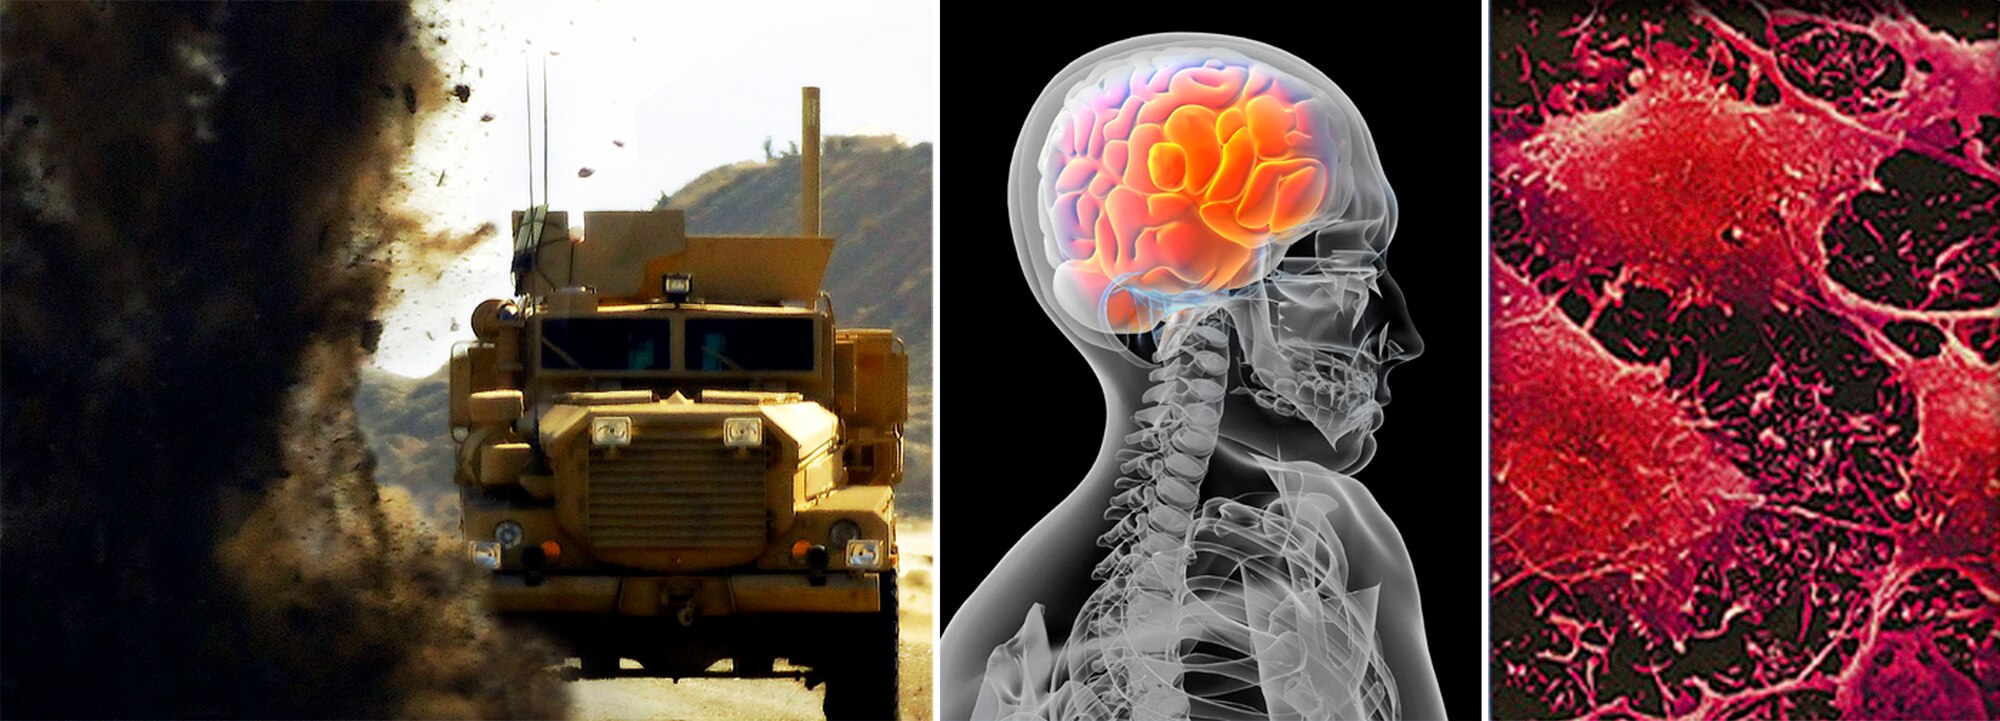 Starting with detonation of an improvised explosive device near an armored vehicle, this illustration demonstrates the dramatic progression of one potential source of traumatic brain injury — from the violent explosion to cellular damage in the brain from the concussion. (Armored vehicle photo by Tech. Sgt. Samuel Bendet/File Graphics)